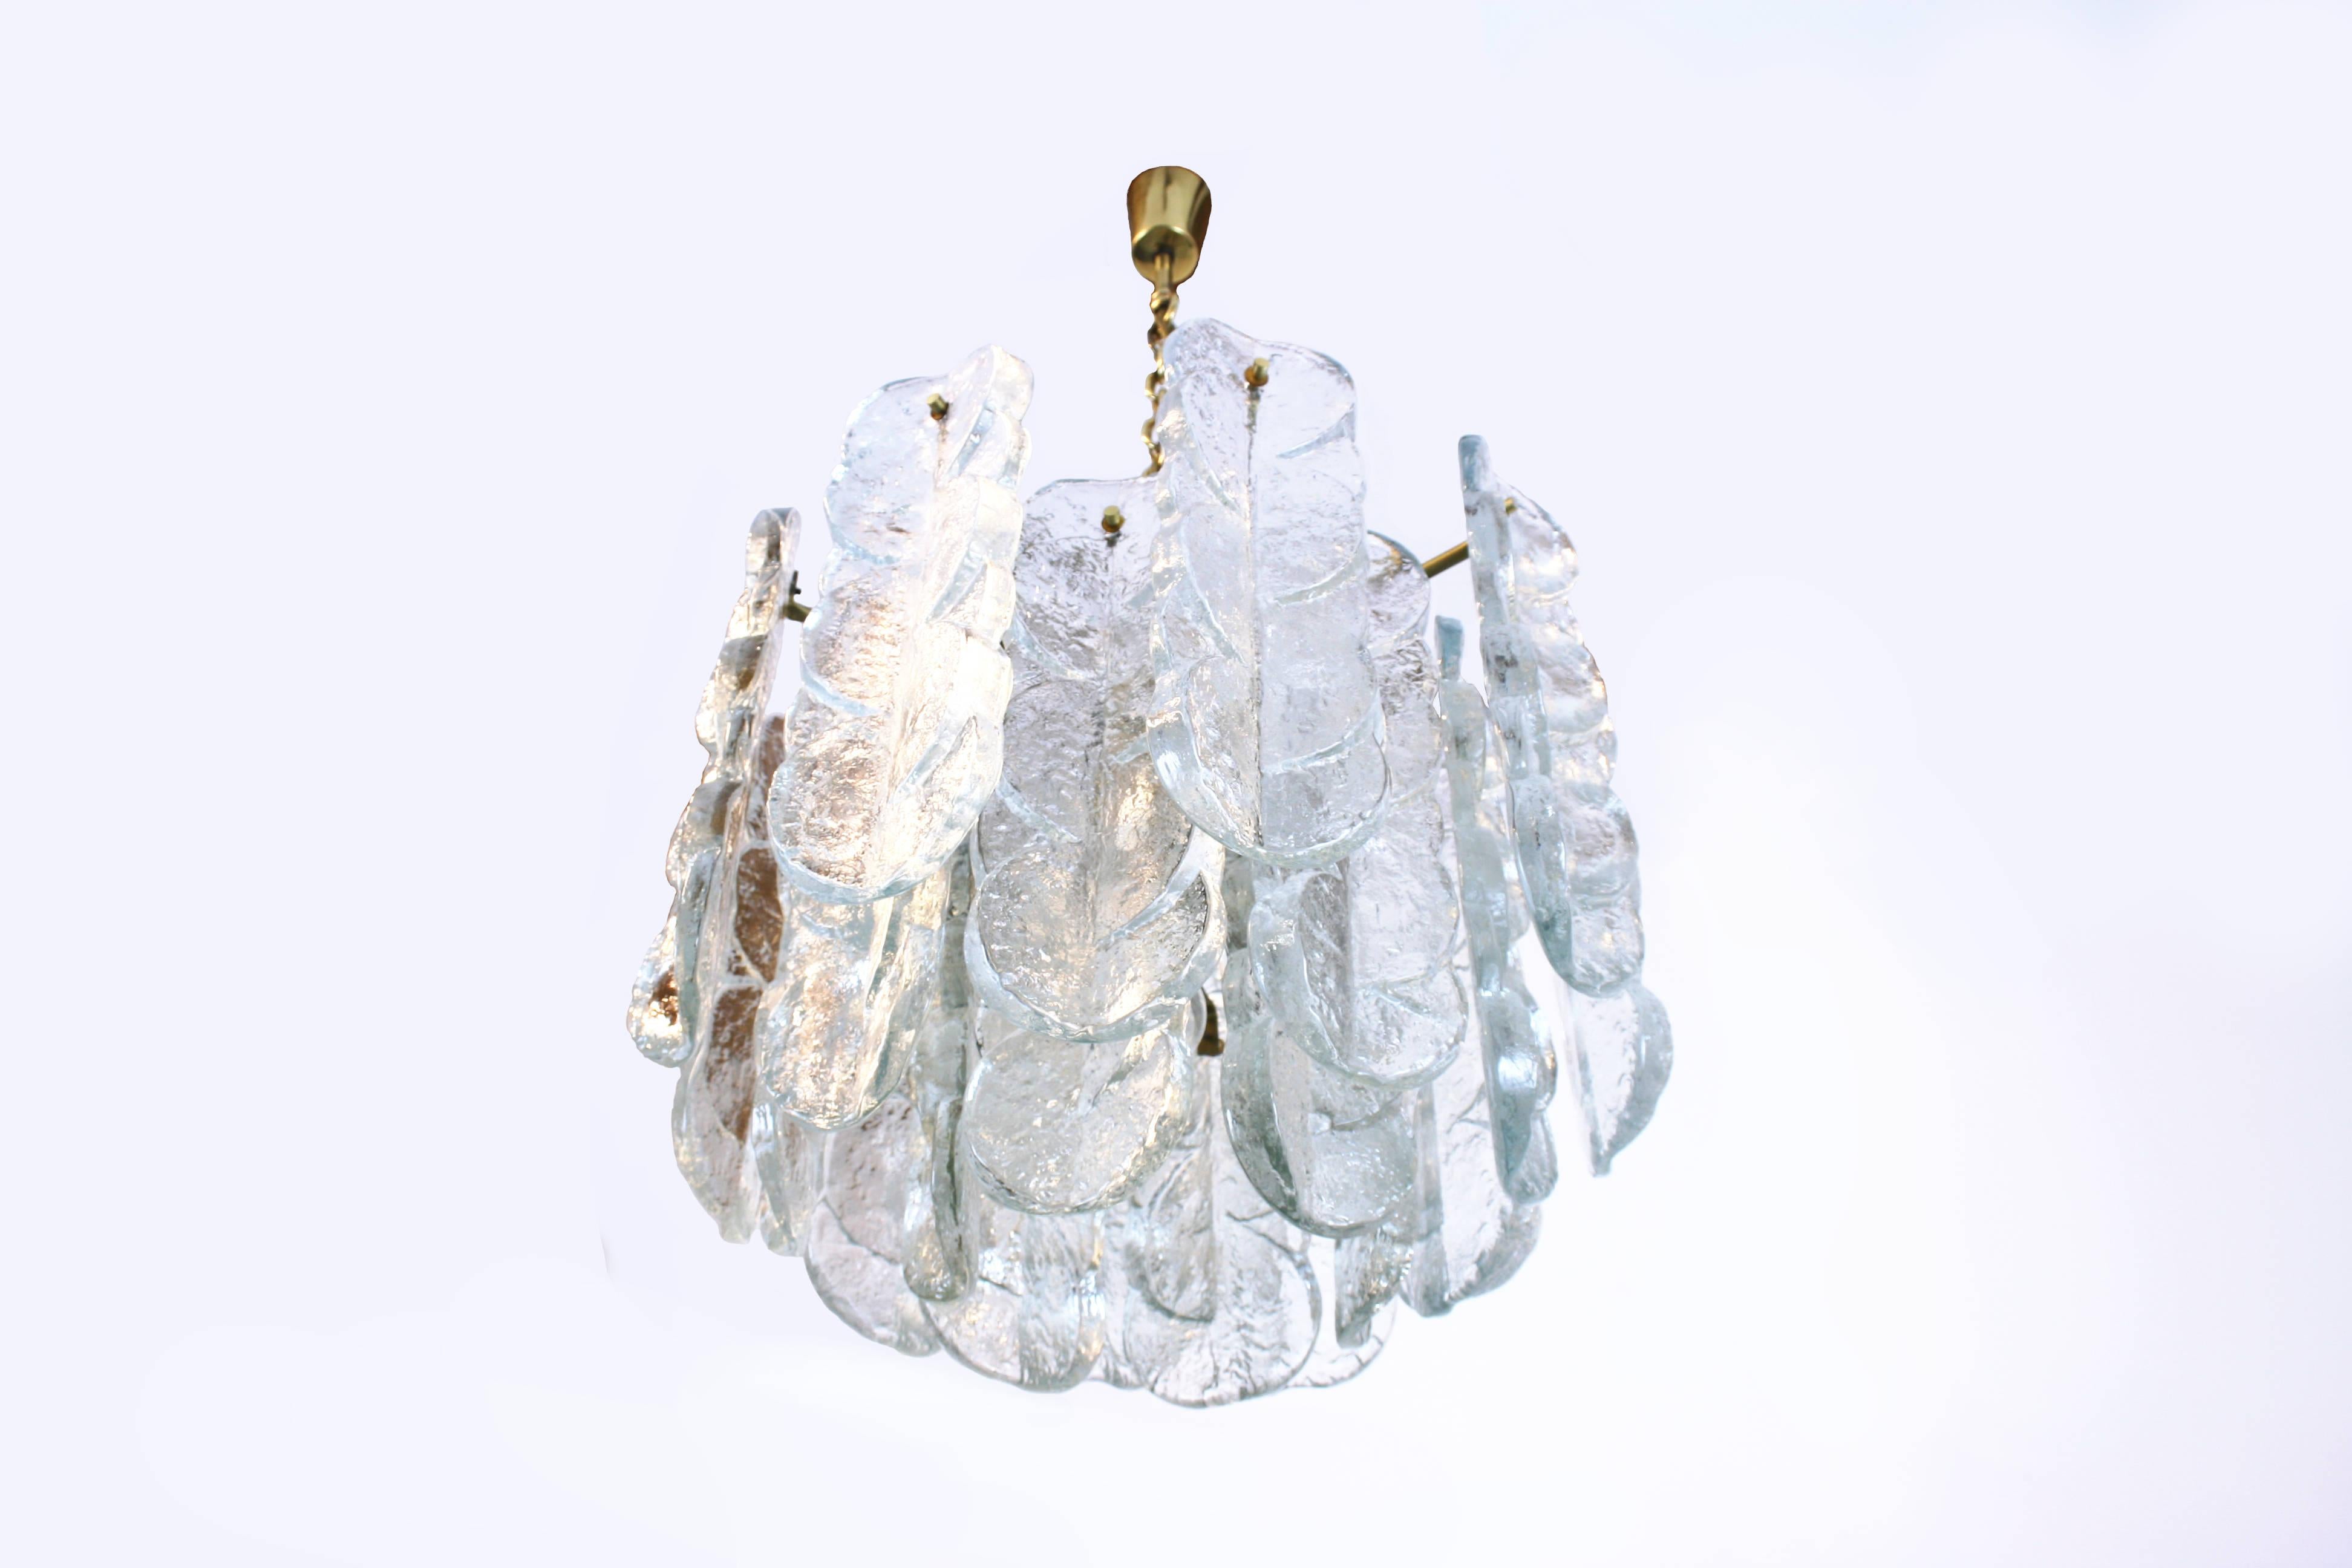 Citrus Swirl chandelier or pendant by J.T. Kalmar from Vienna, Austria. A skilfully produced object revealing an impressive presence. The thick and quite heavy glass pieces are fixed with brass screws on a solid brass frame. The refraction of the